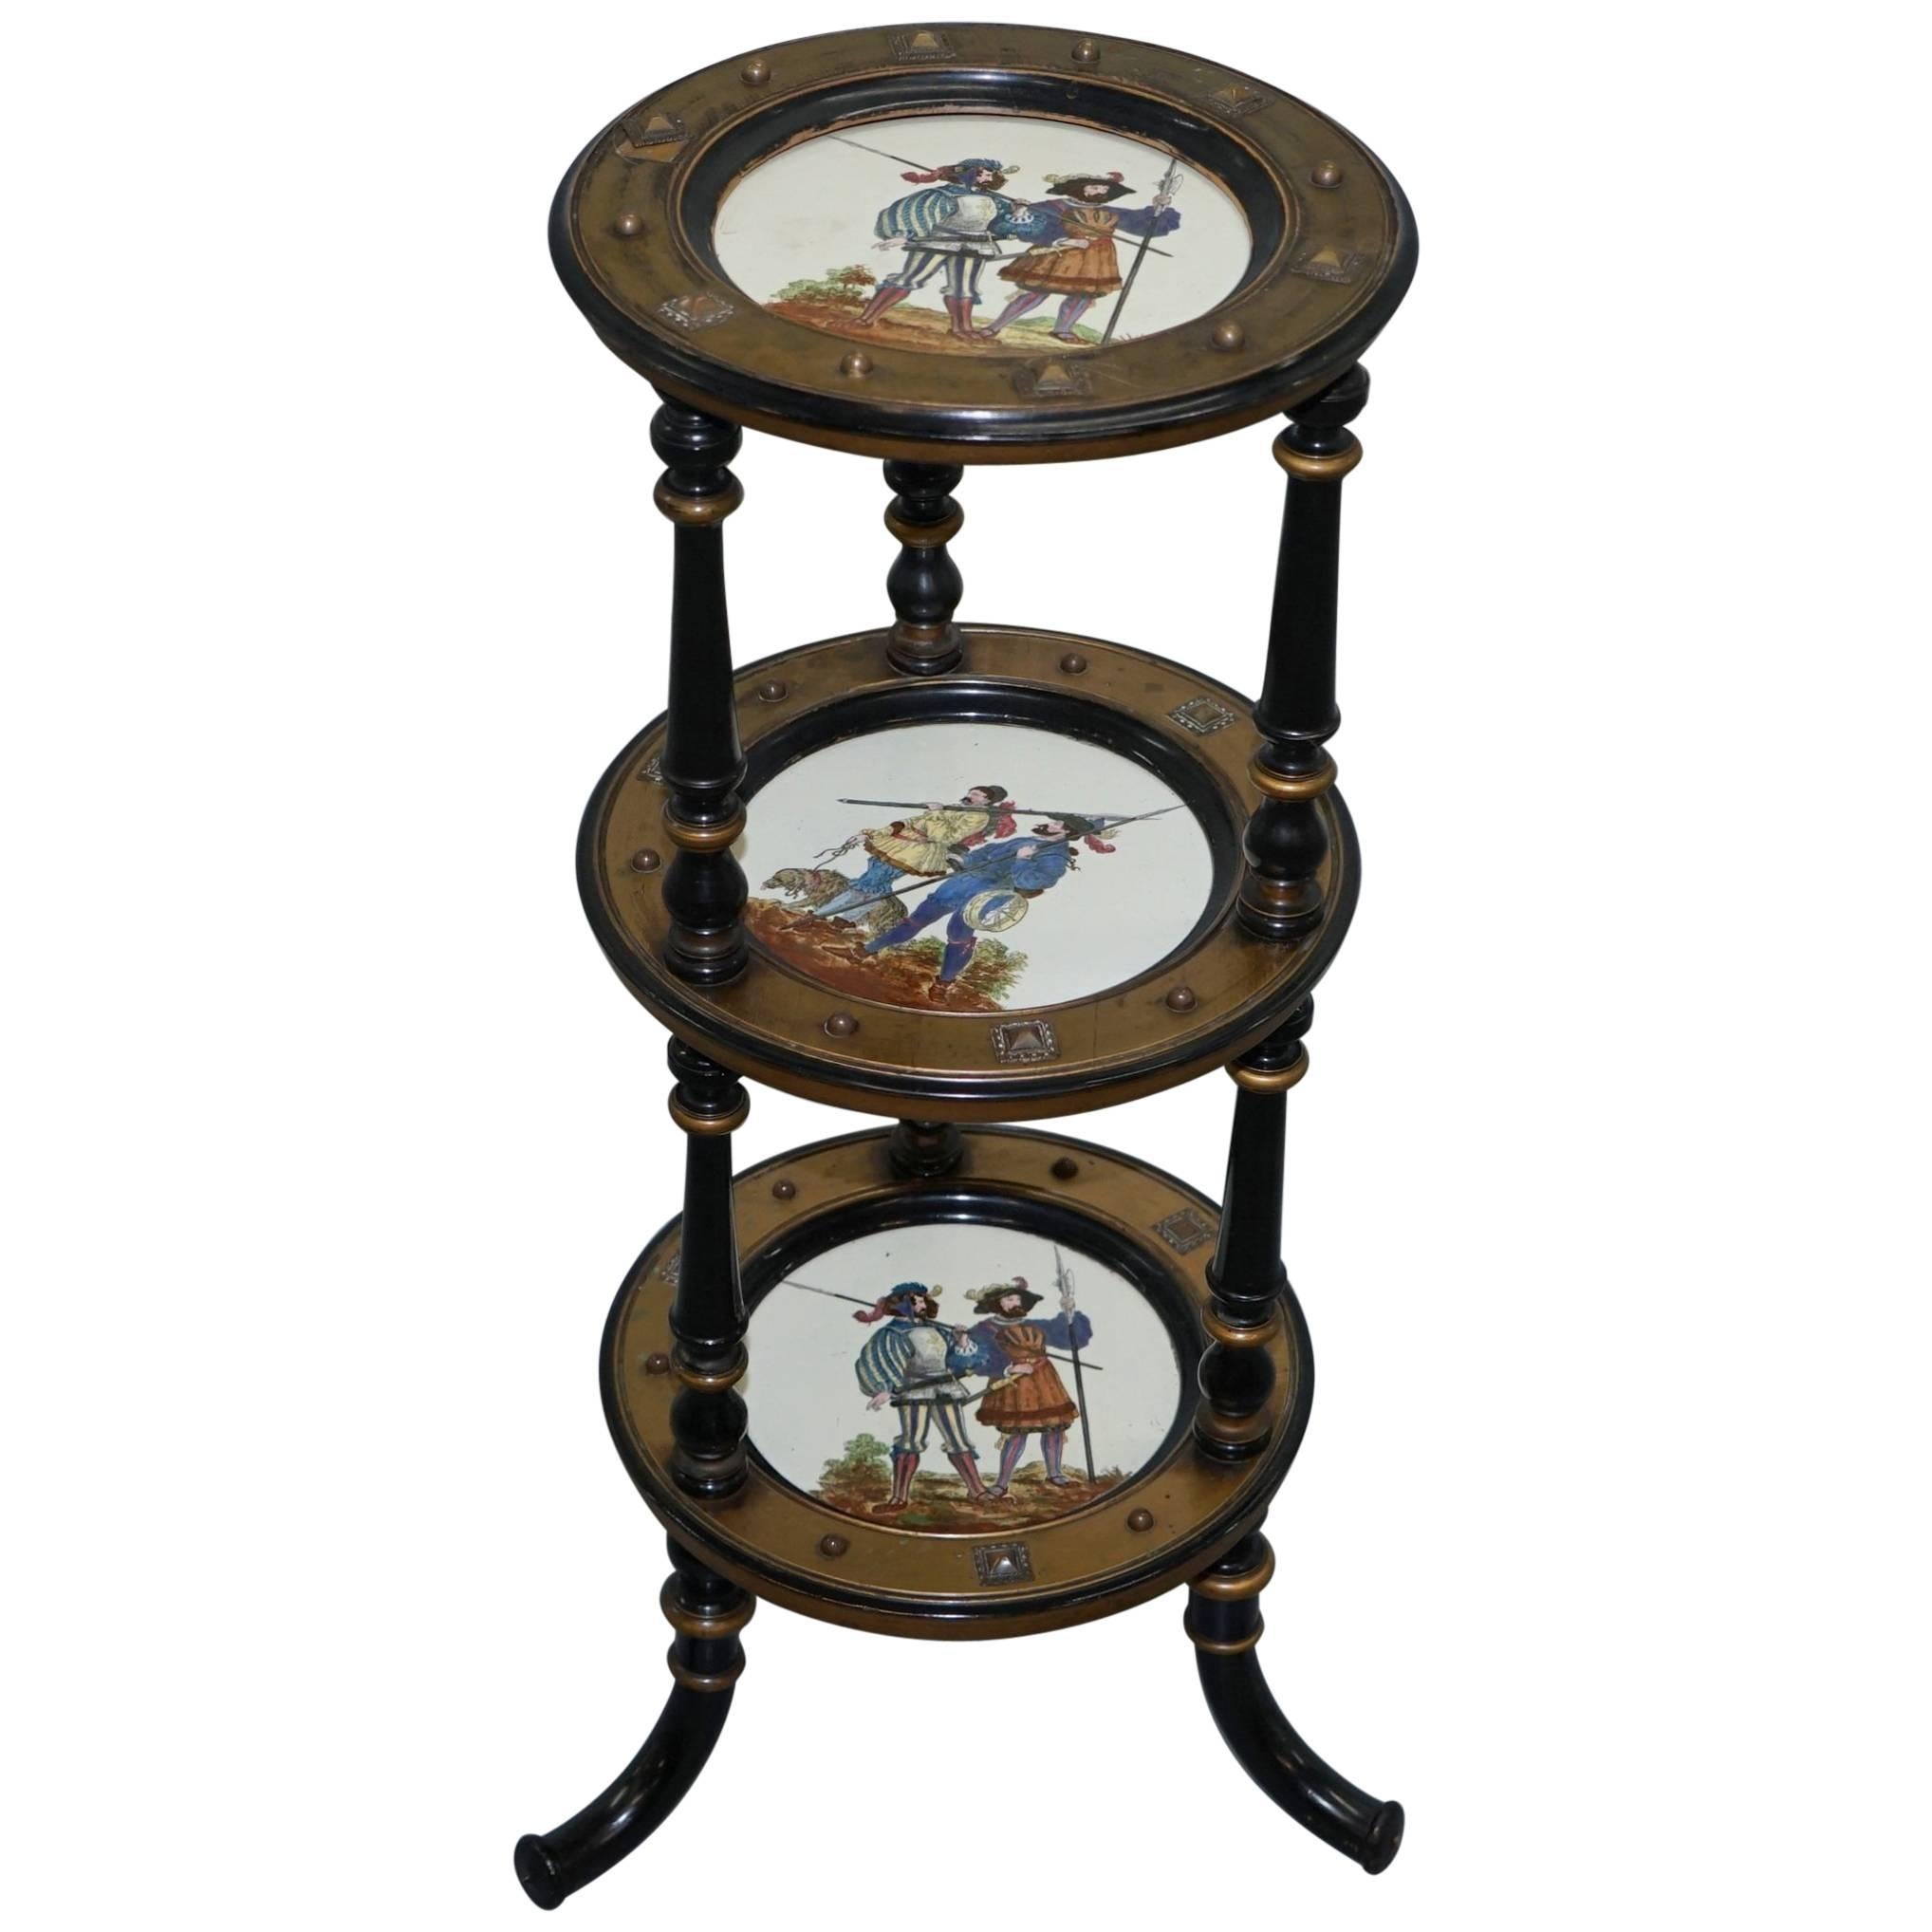 Aesthetic Movement Three-Tired Display Stand Hand-Painted Plates For Sale